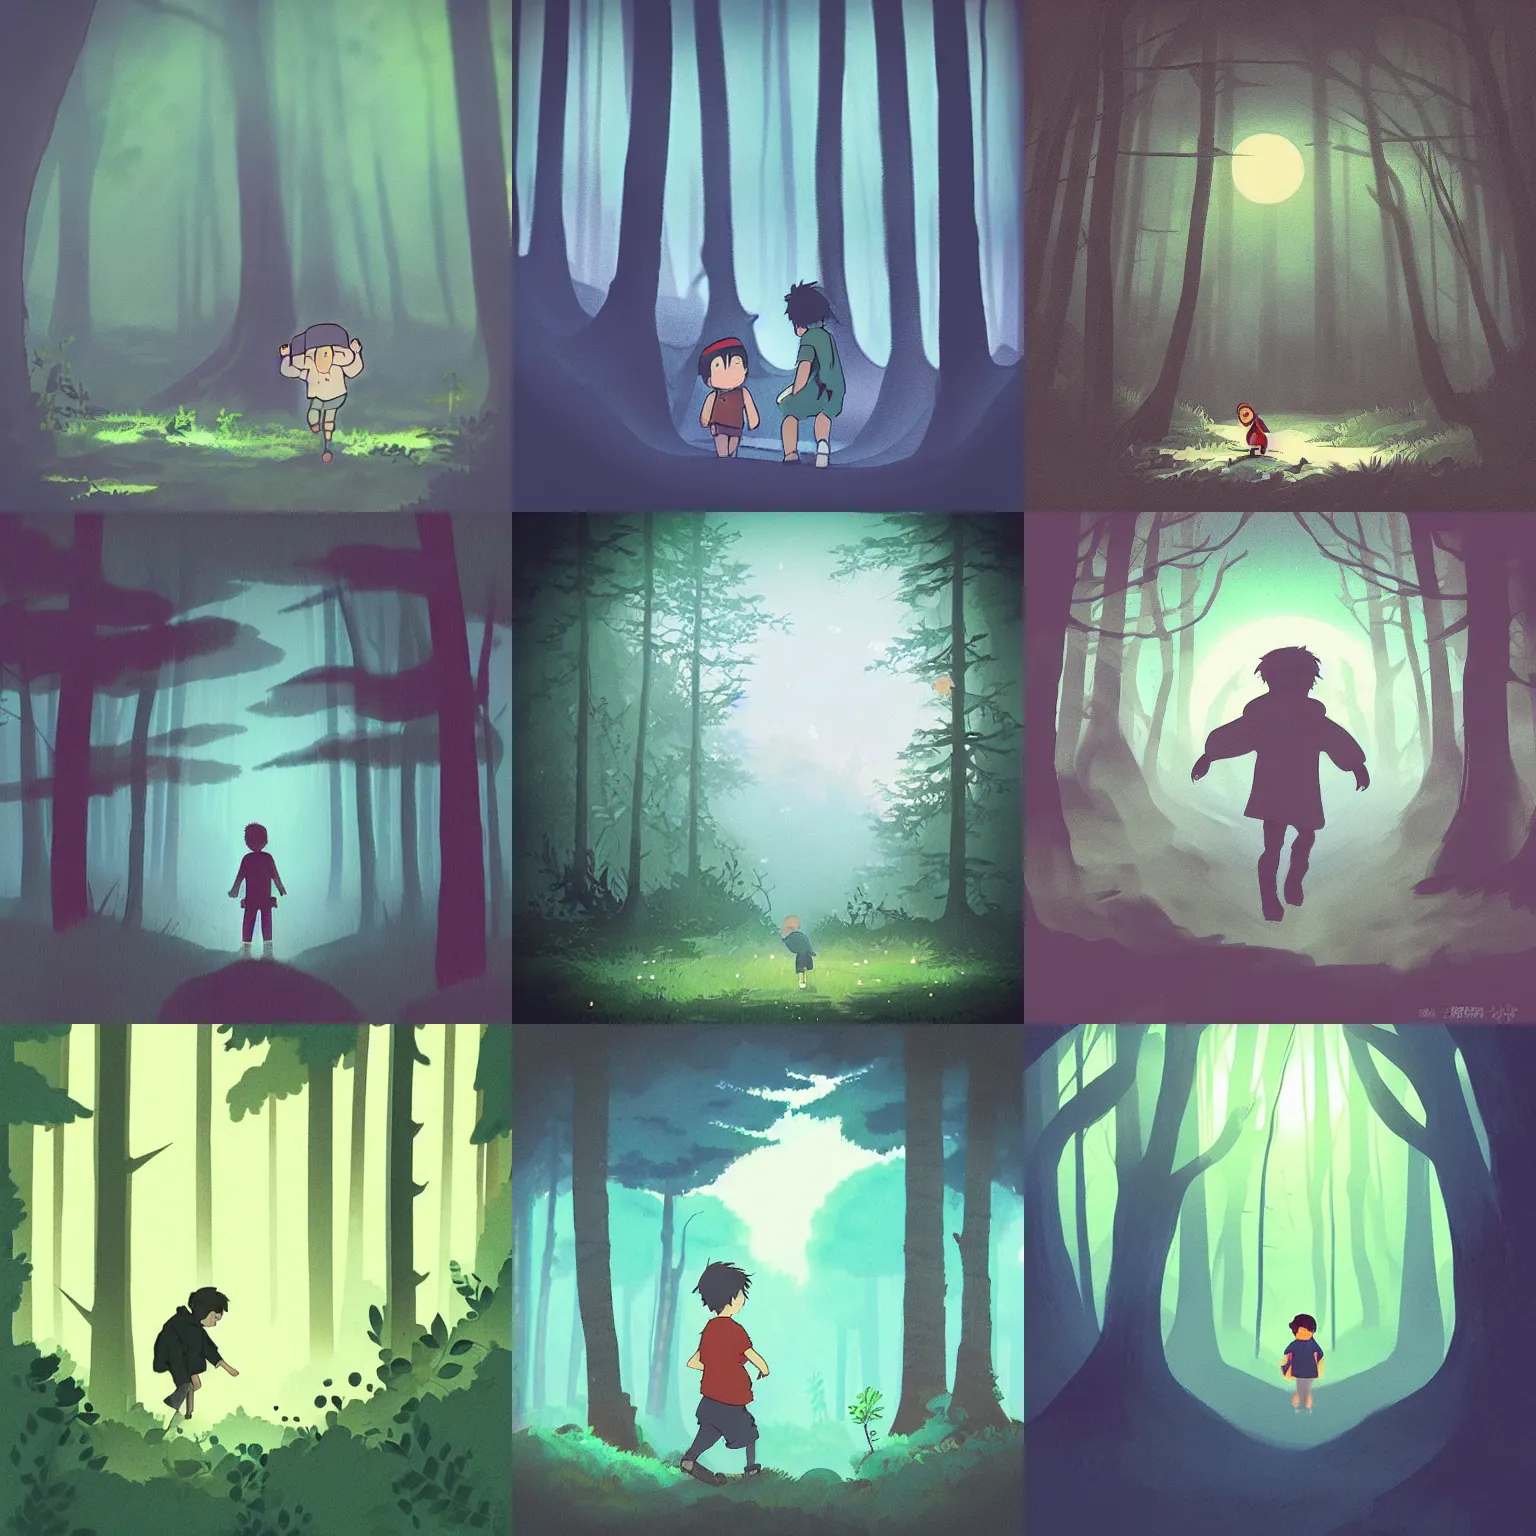 Prompt: “a boy been chased through a dimly lit forest at night. In the style of Studio Ghibli”